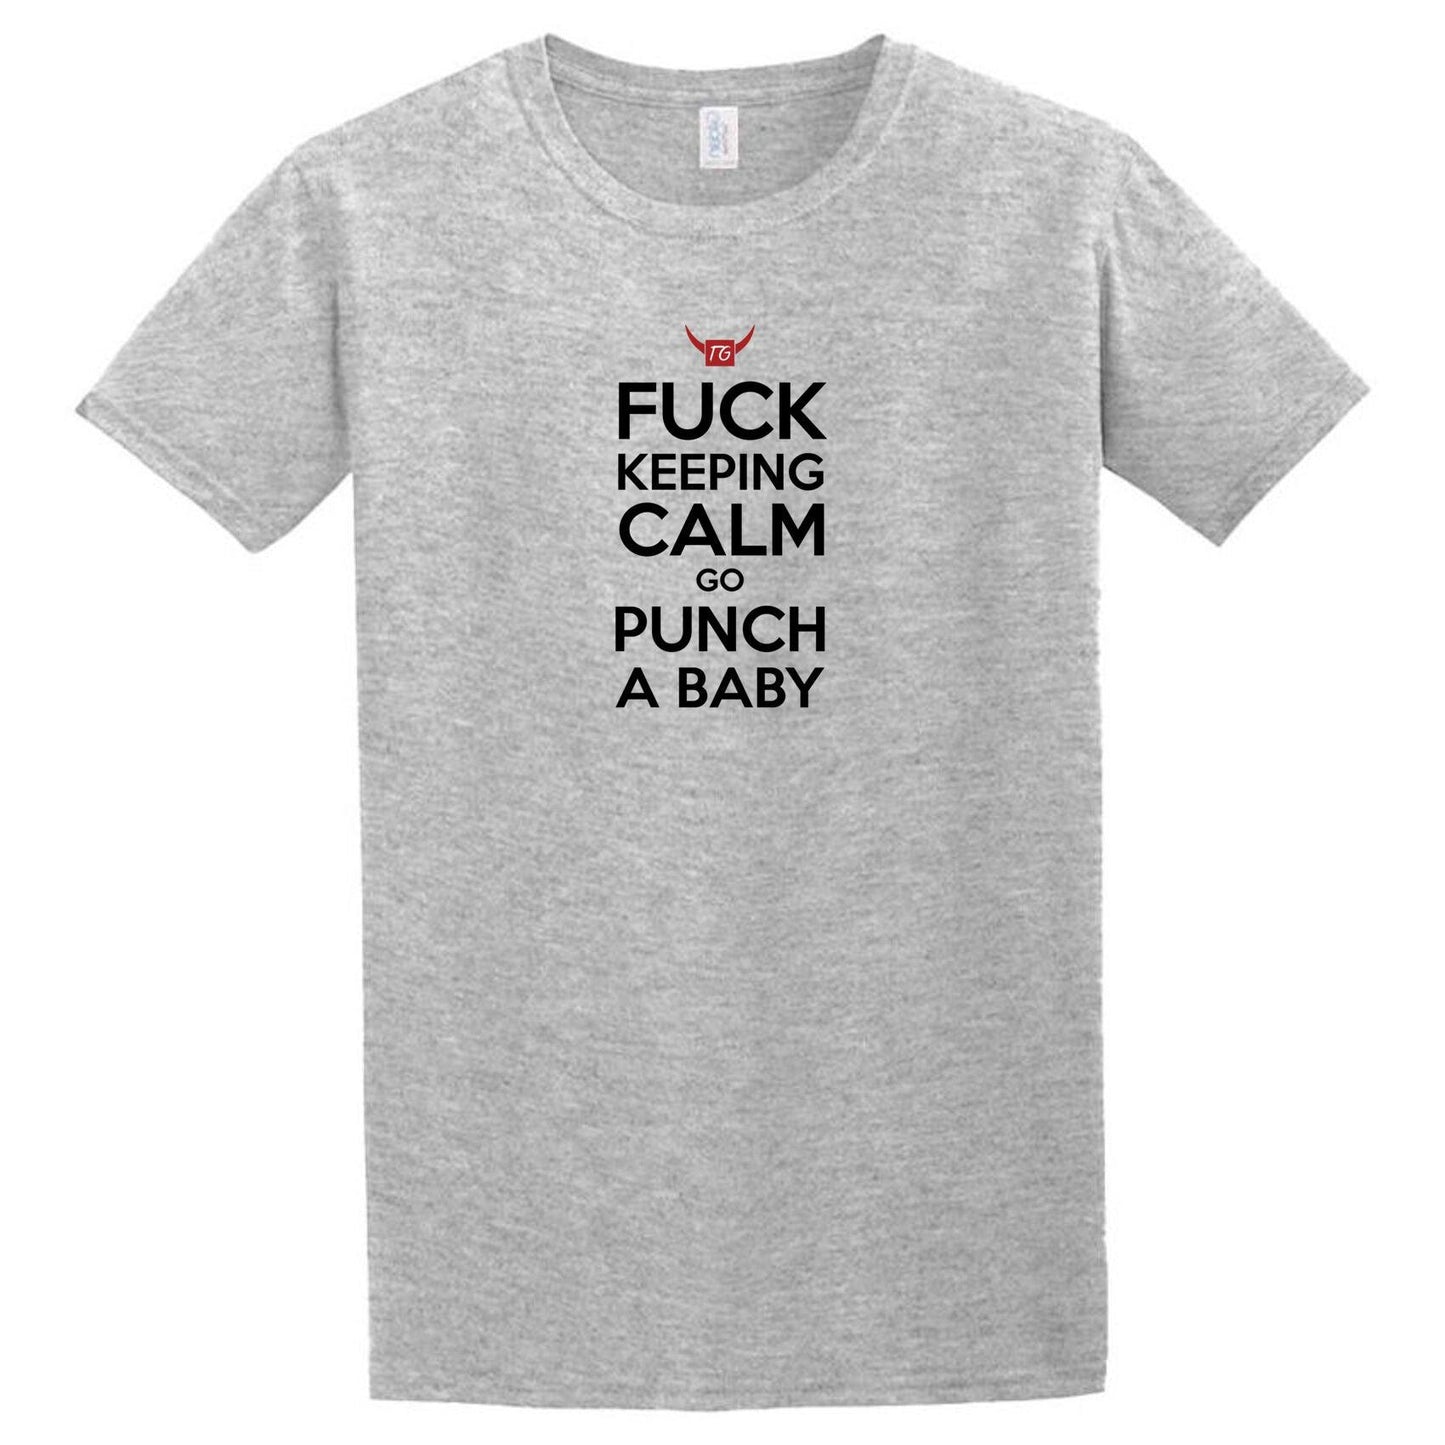 A Twisted Gifts Punch A Baby T-Shirt.